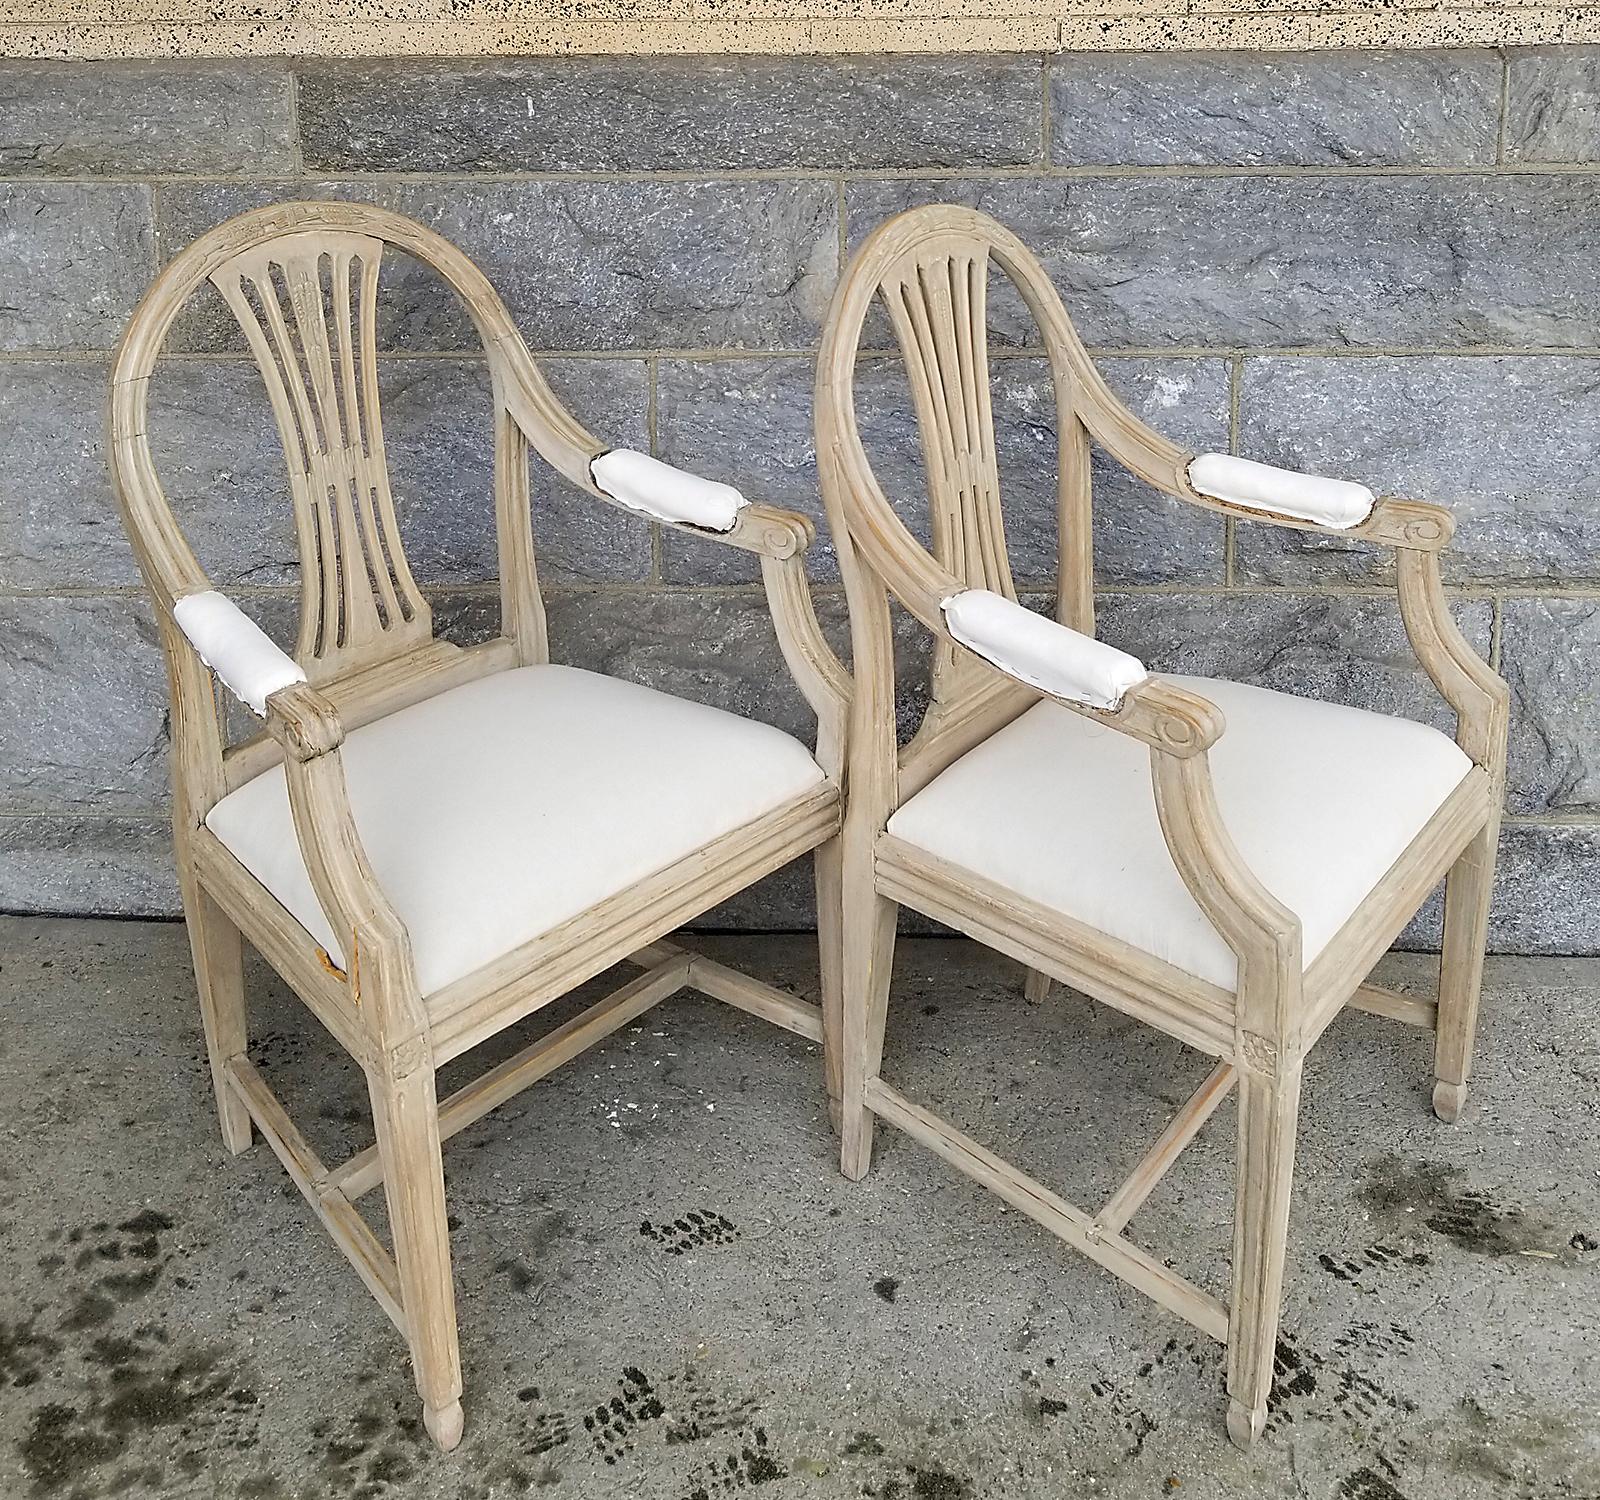 Pair of period Gustavian armchairs, Sweden circa 1800, with rounded backs and upholstered seats. The pierced splats and top rails have carvings of wheat, a symbol of prosperity and abundance. Padded armrests, square legs, and H-shaped stretchers. No